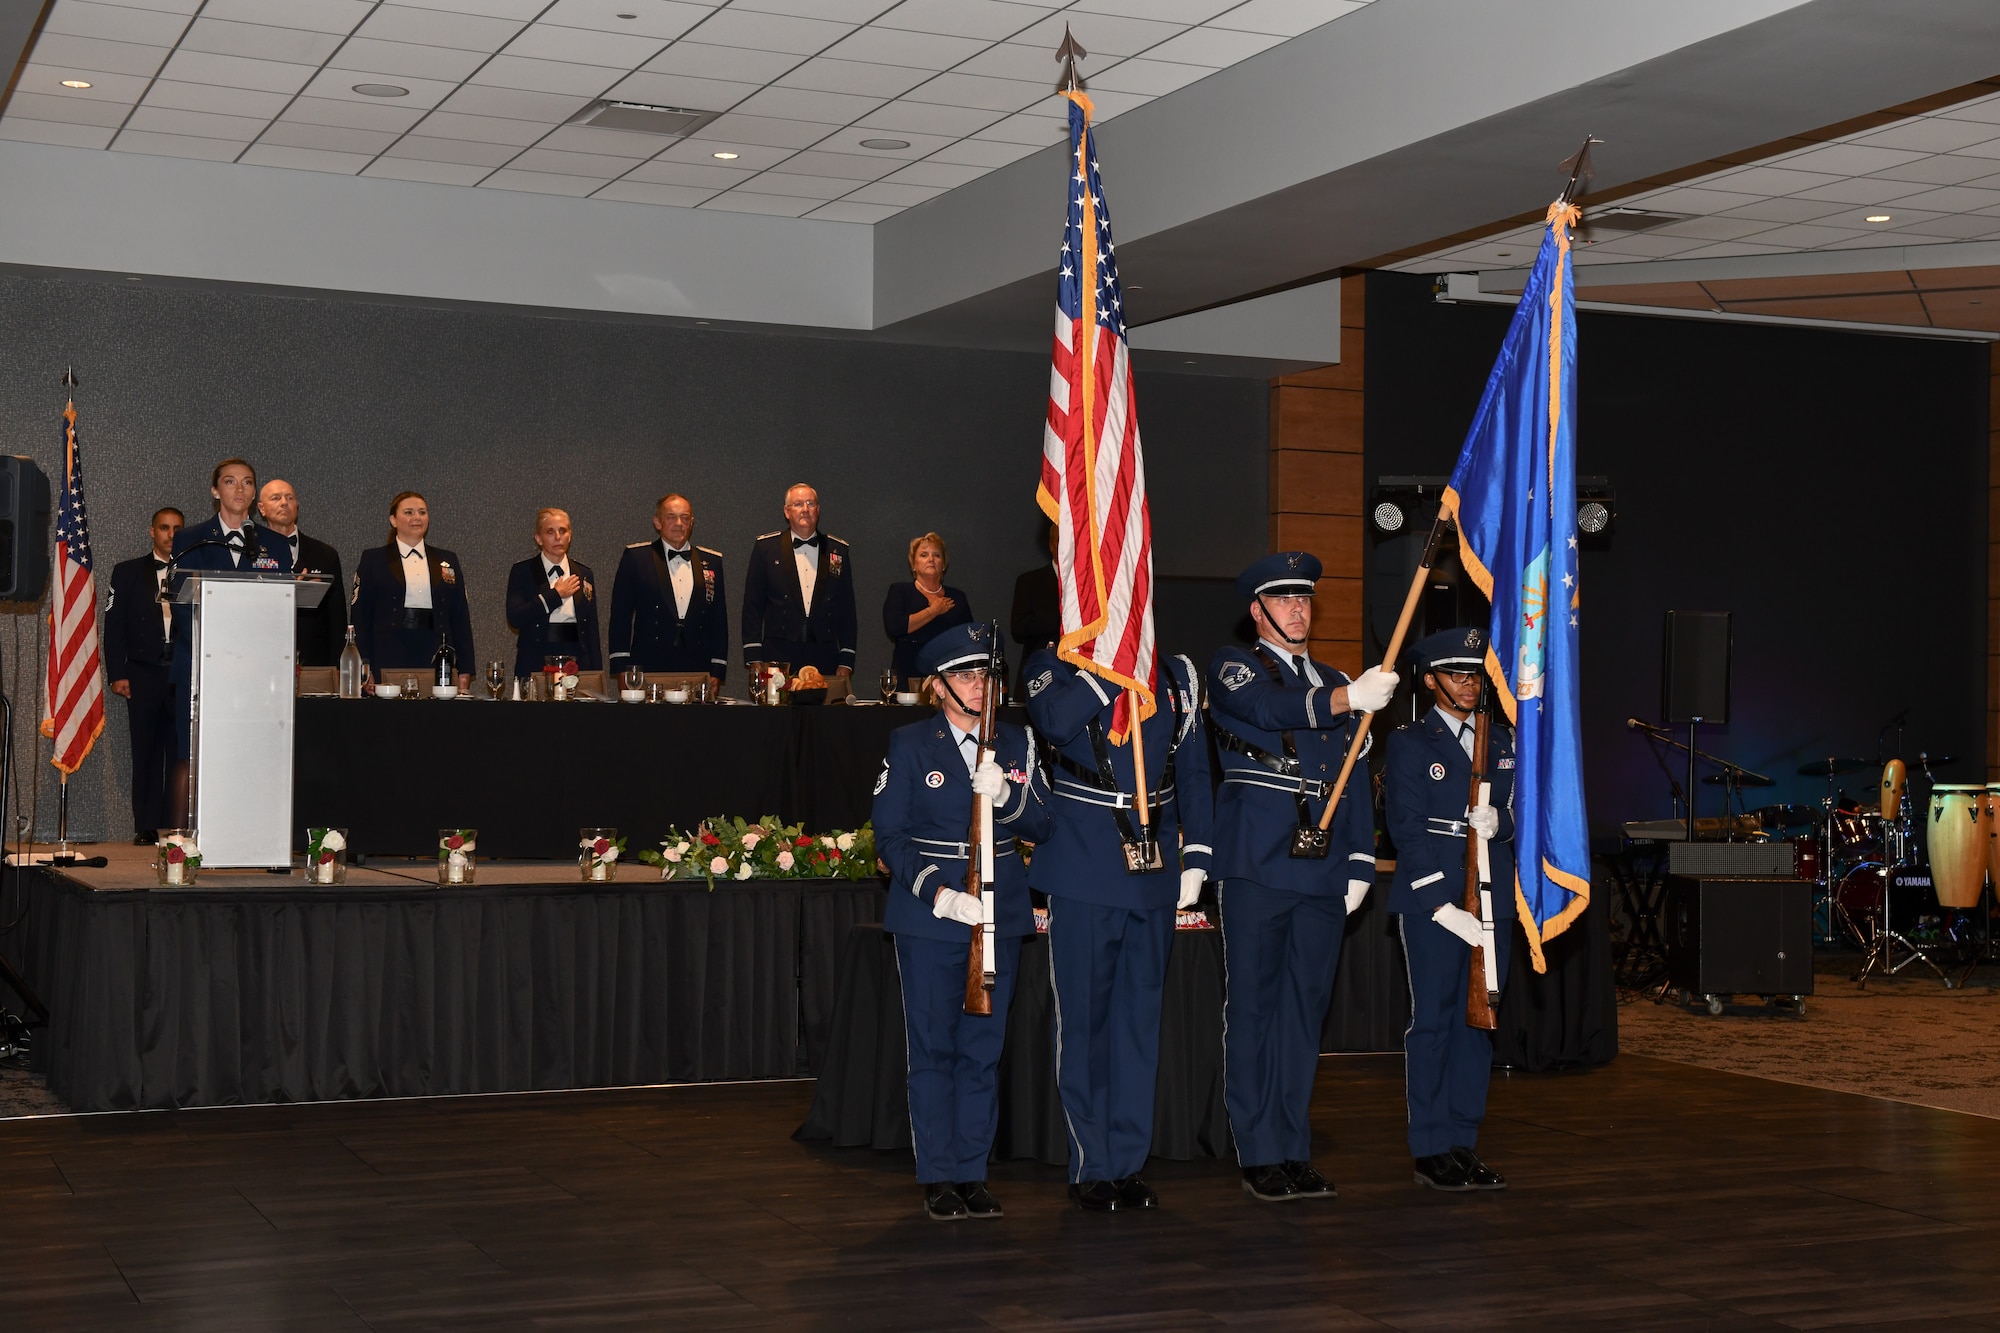 The Youngstown Air Reserve Base Community Council hosted a ball in partnership with the 910th Airlift Wing to honor the 75th birthday of the U.S. Air Force.